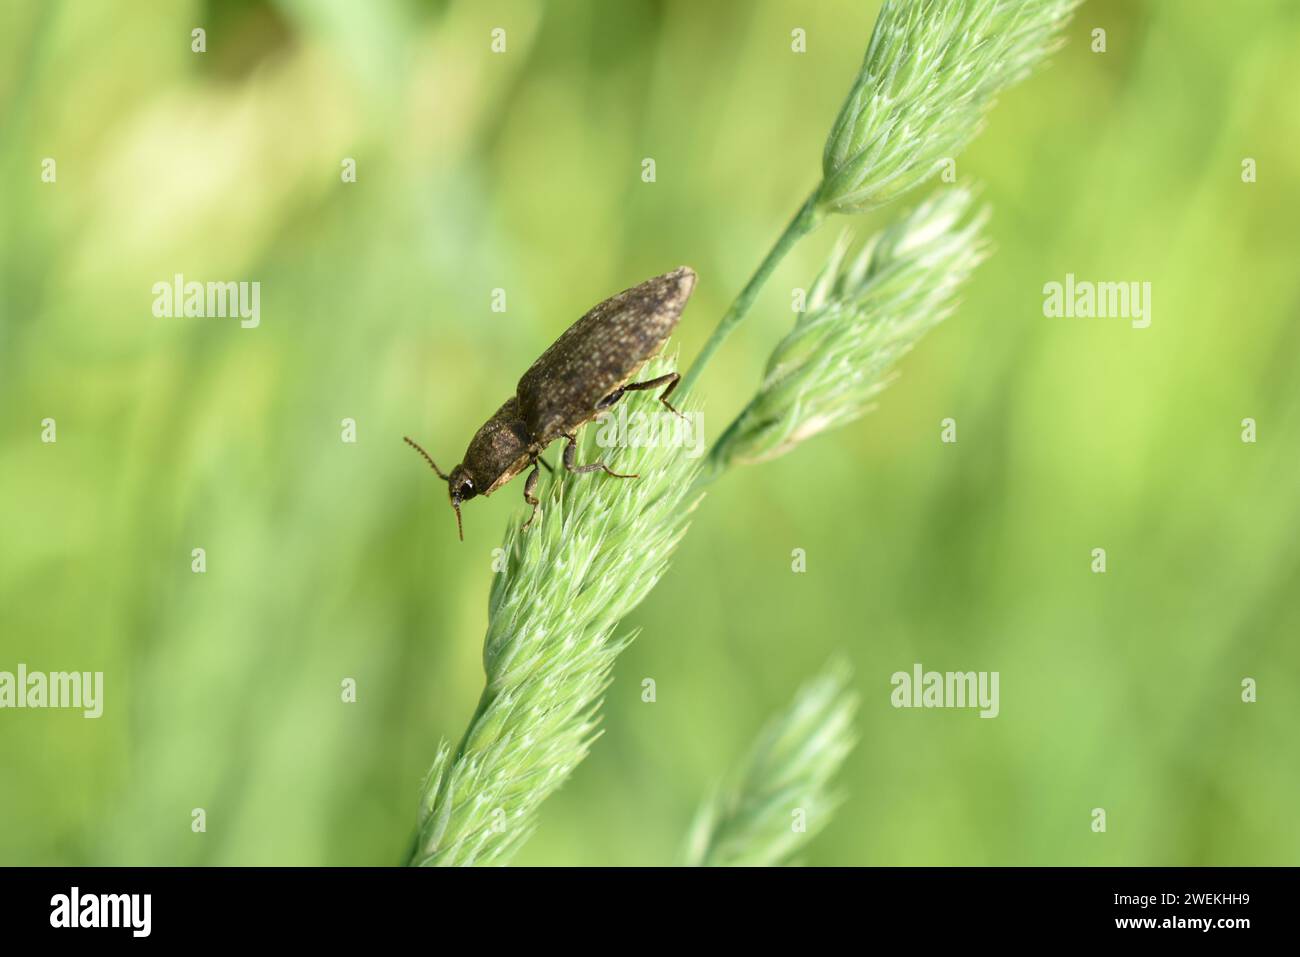 A gray click beetle or wireworm sits on green grass, side view. Stock Photo